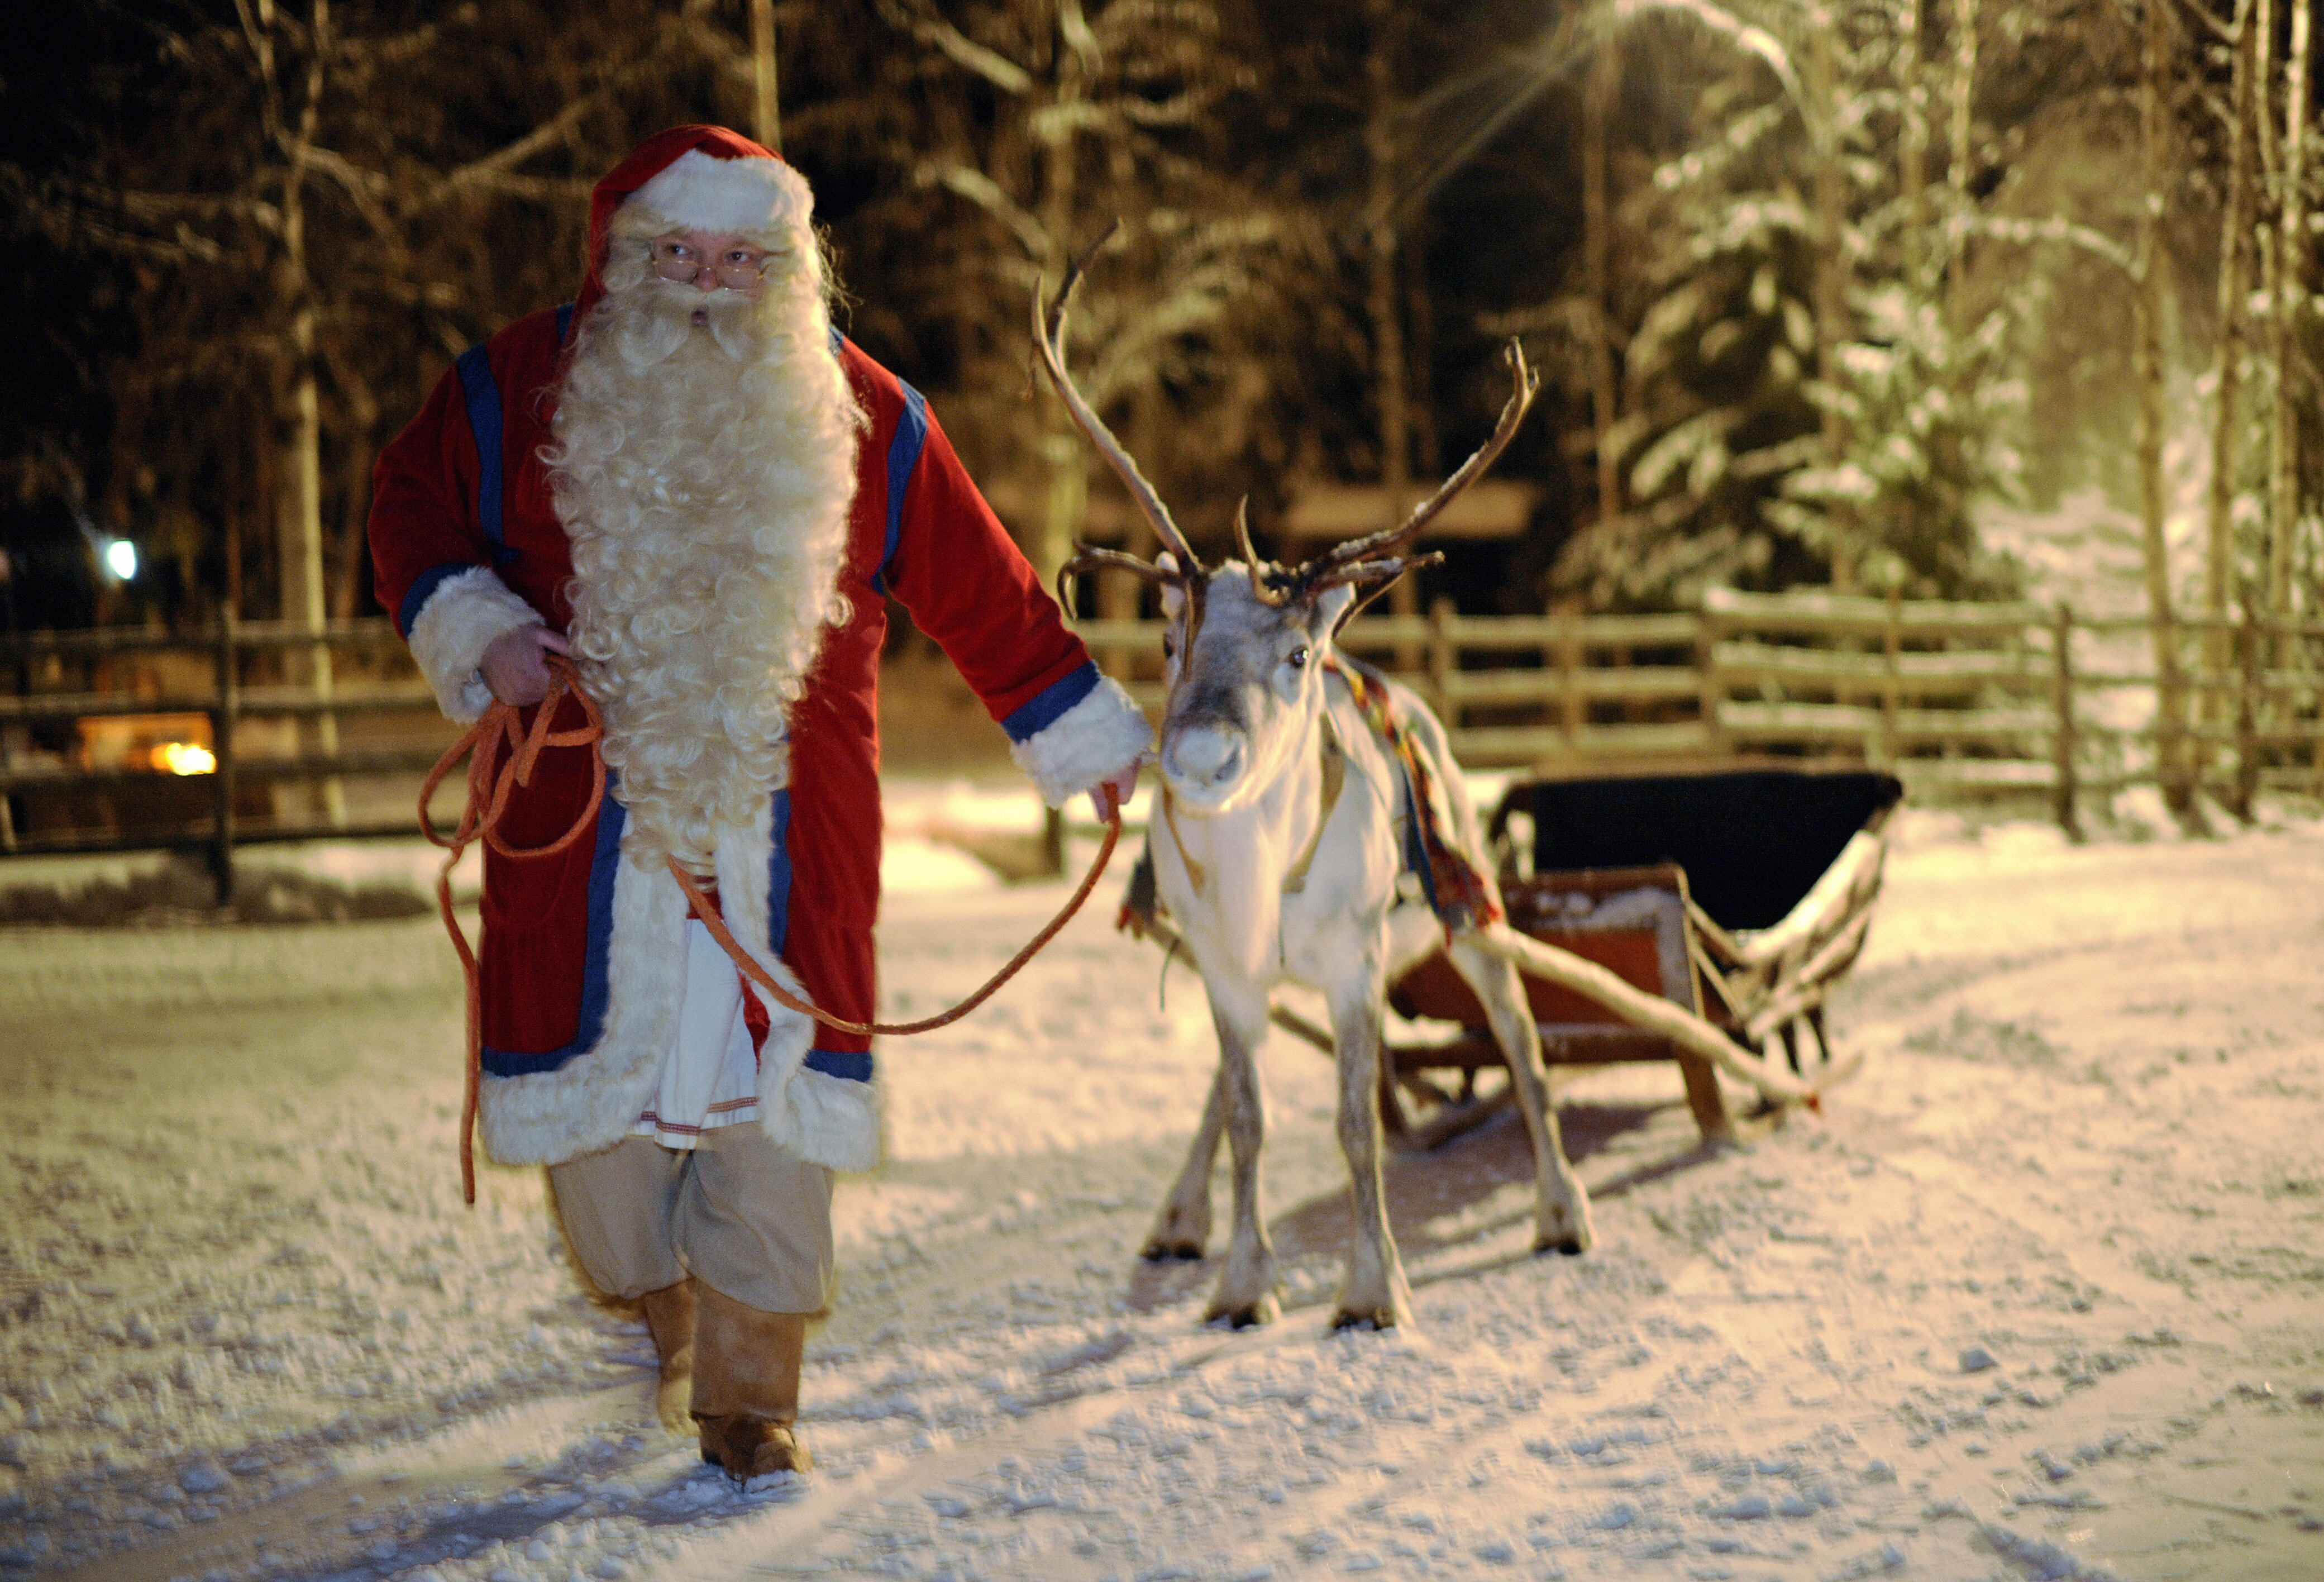 Santa Claus walks with his Reindeer and sled in Rovaniemi, Finland on December 16, 2008. (Olivier Morin/AFP/Getty Images)